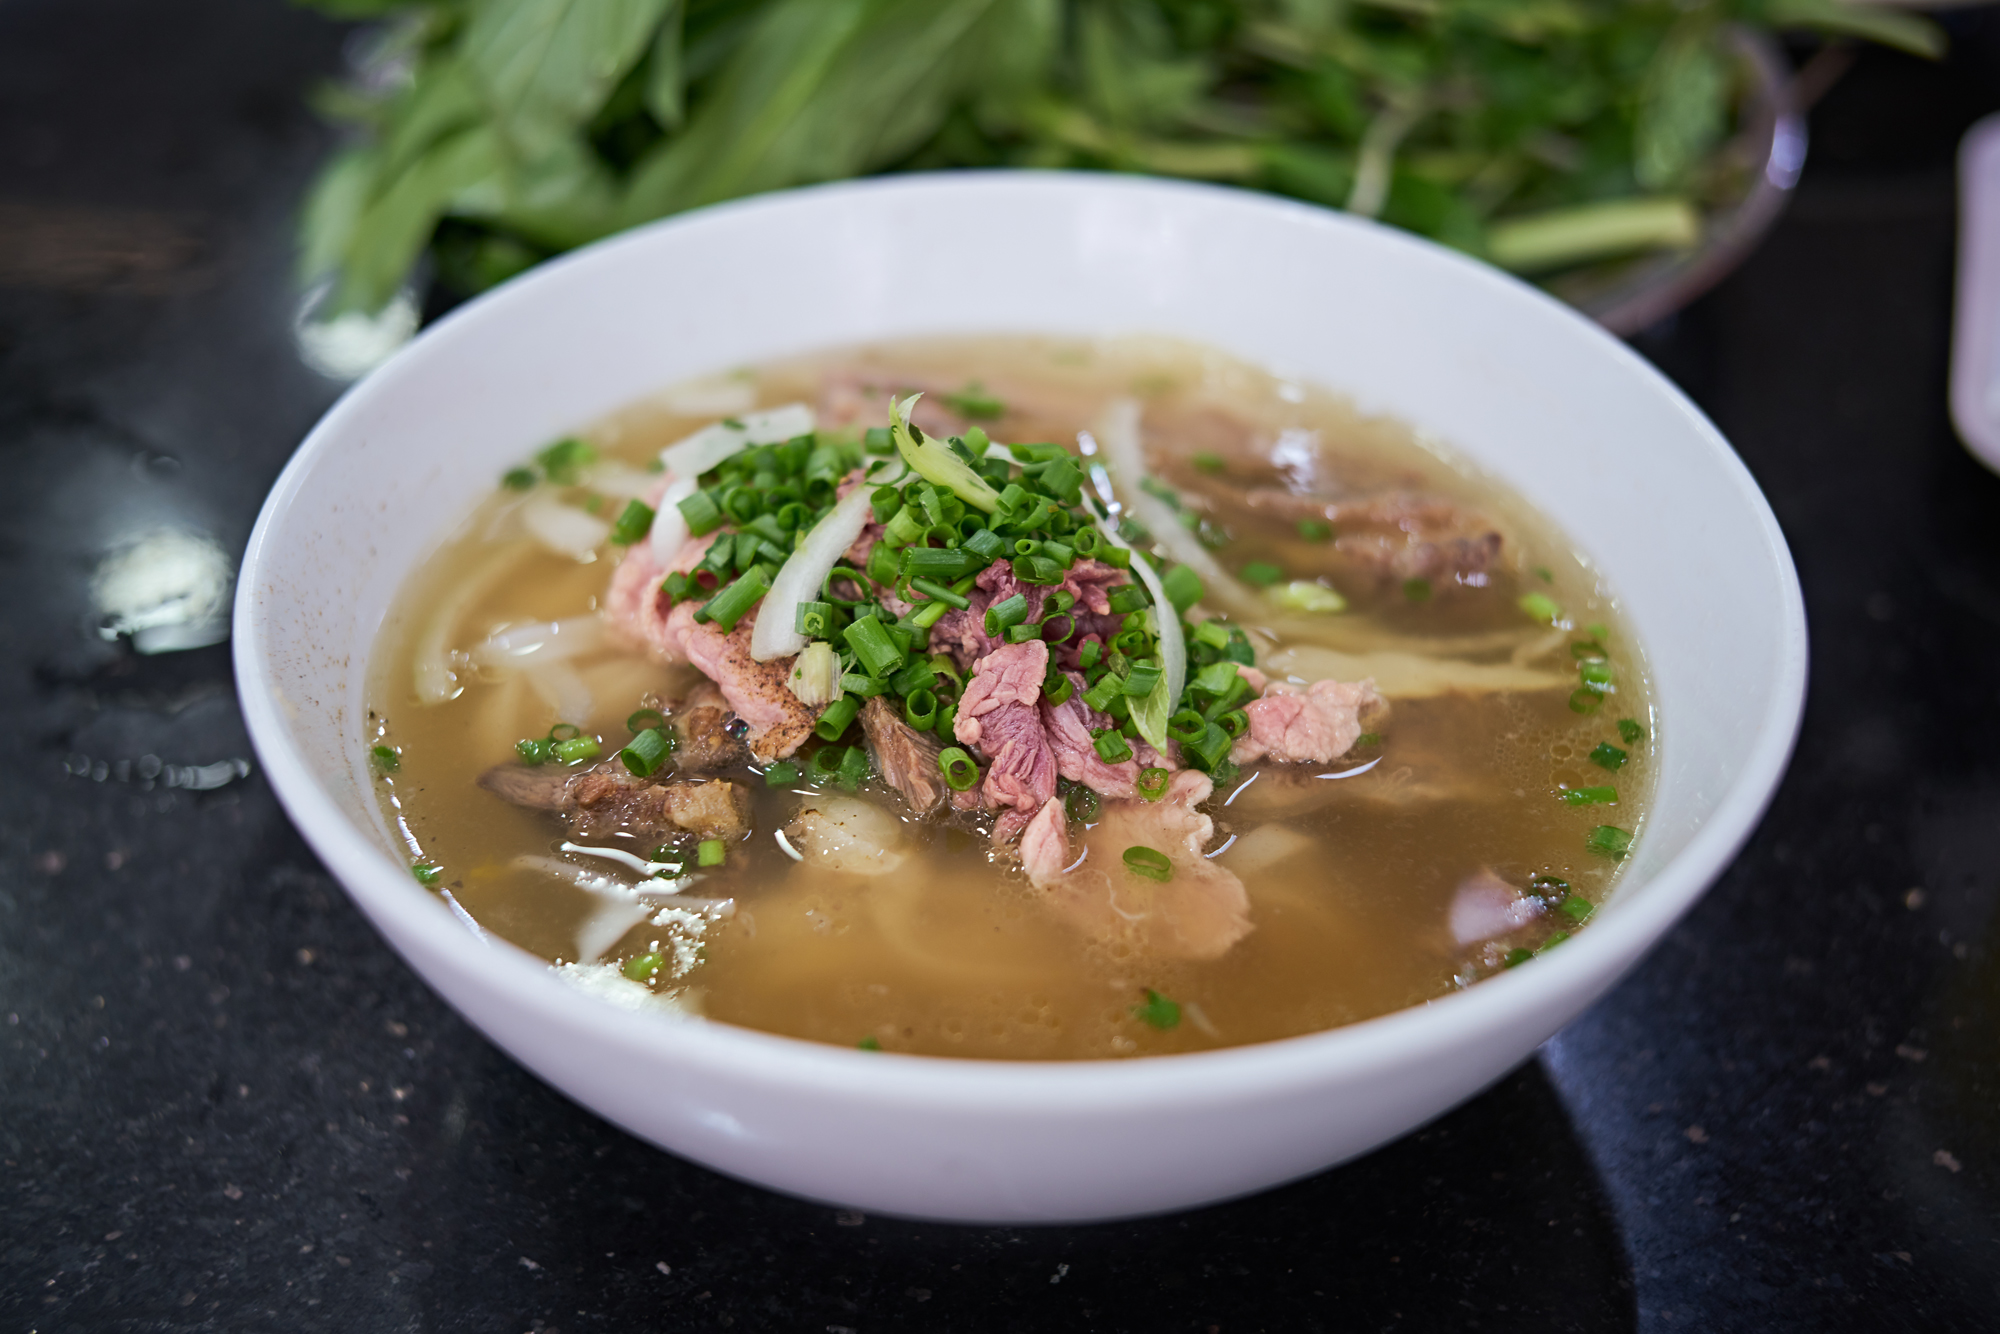 Pho Le serves up an exquisite bowl of pho